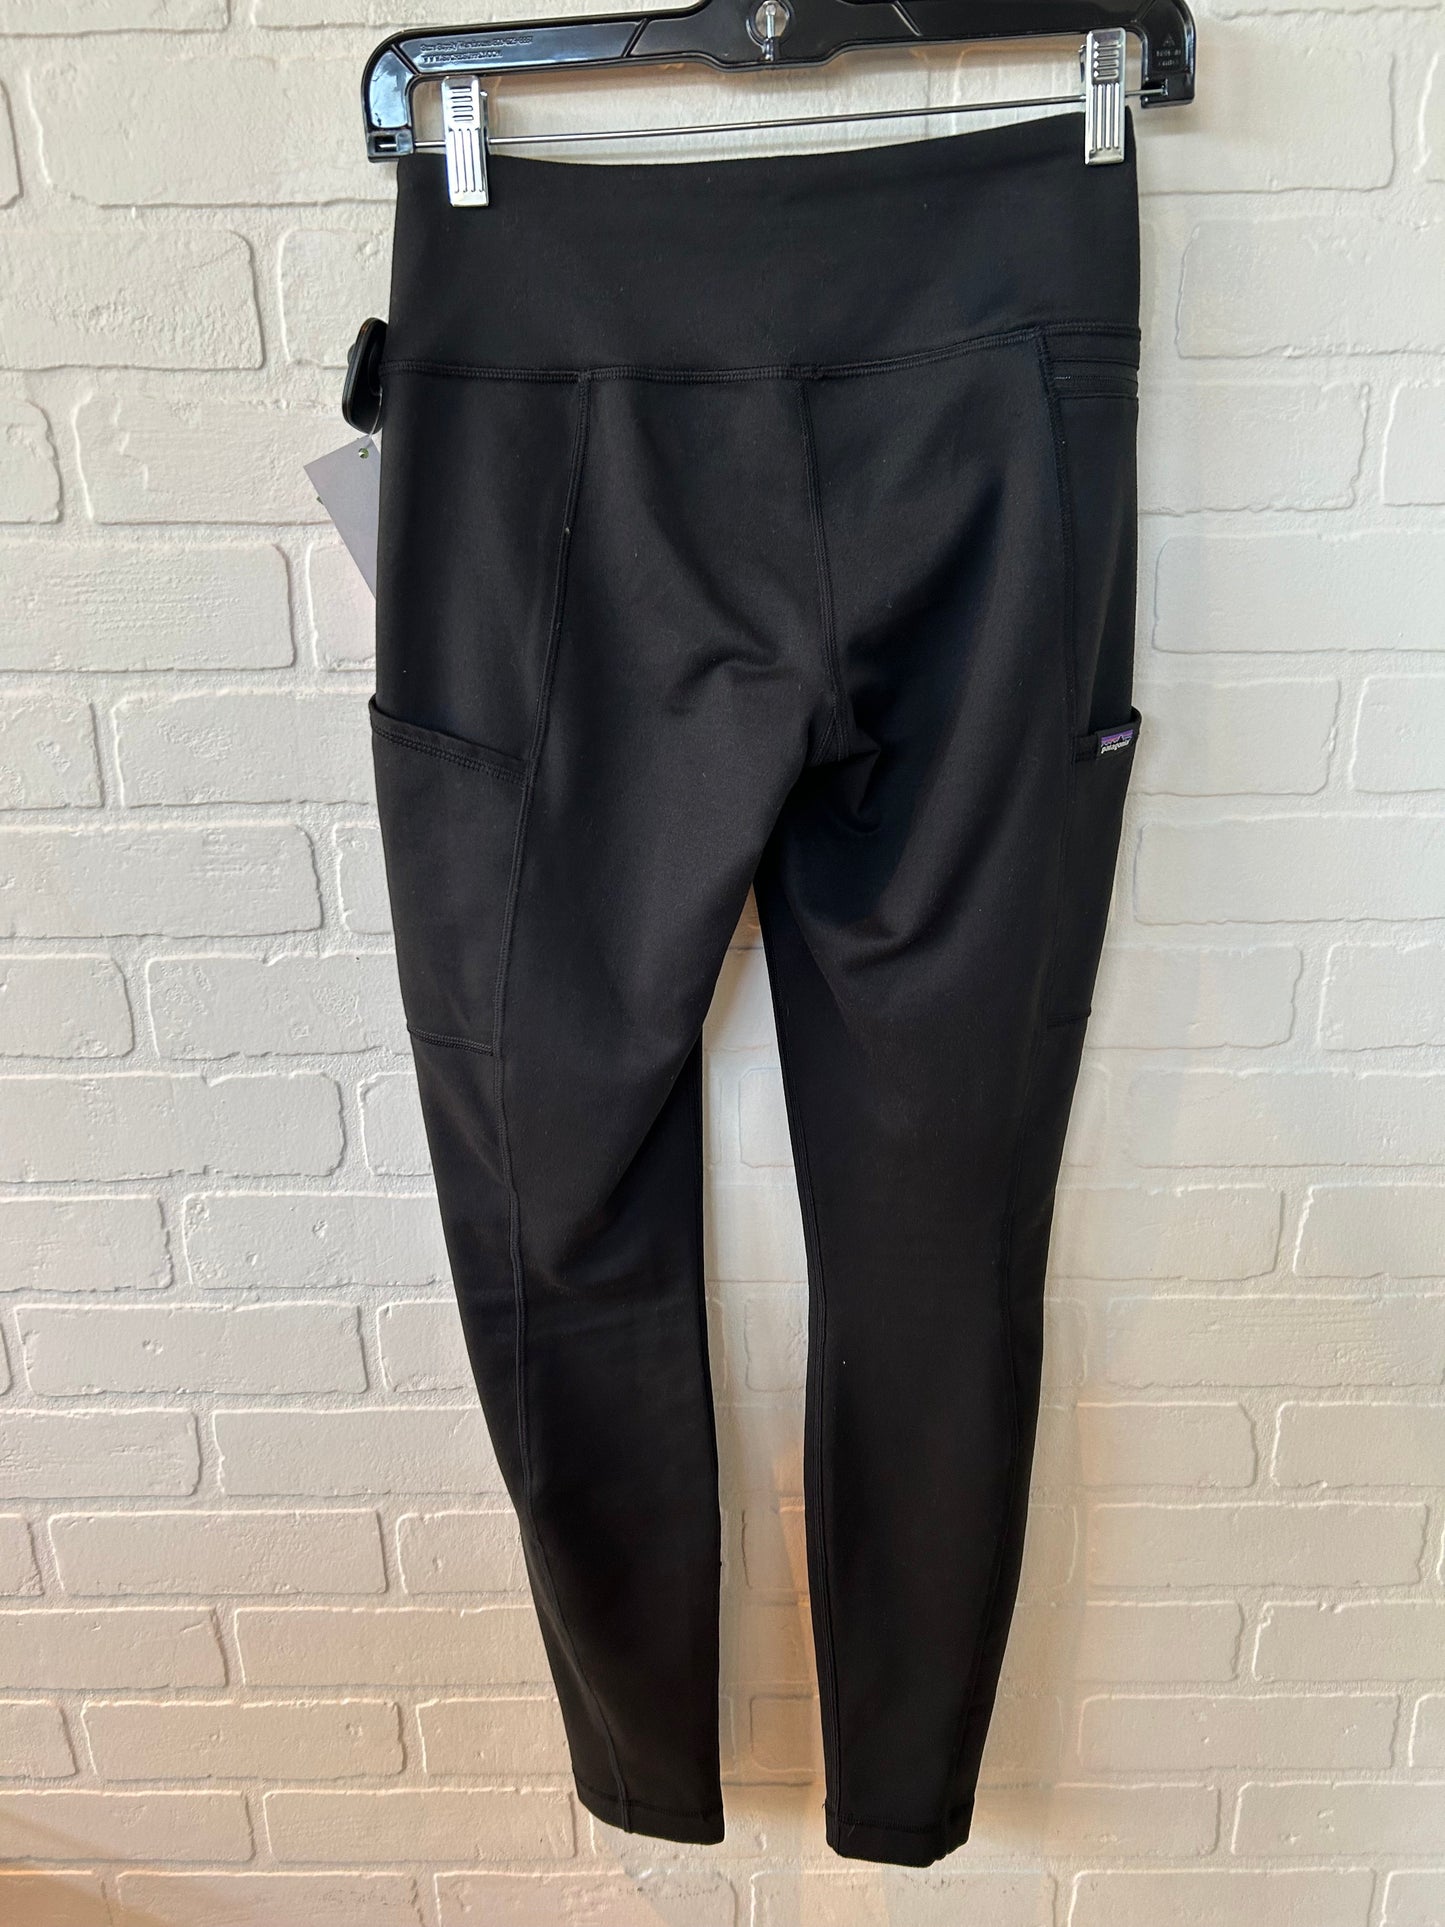 Athletic Leggings By Patagonia  Size: 0